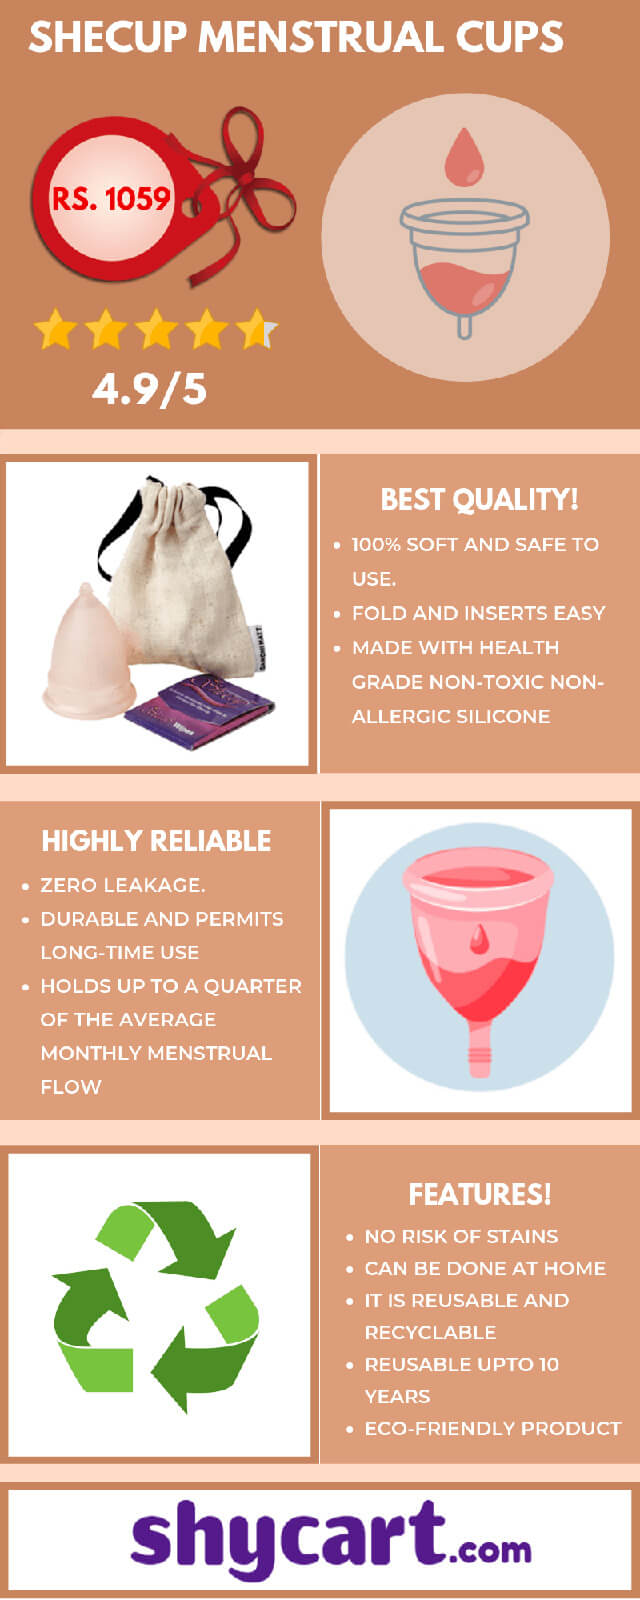 Menstrual cup shecup - Infographic